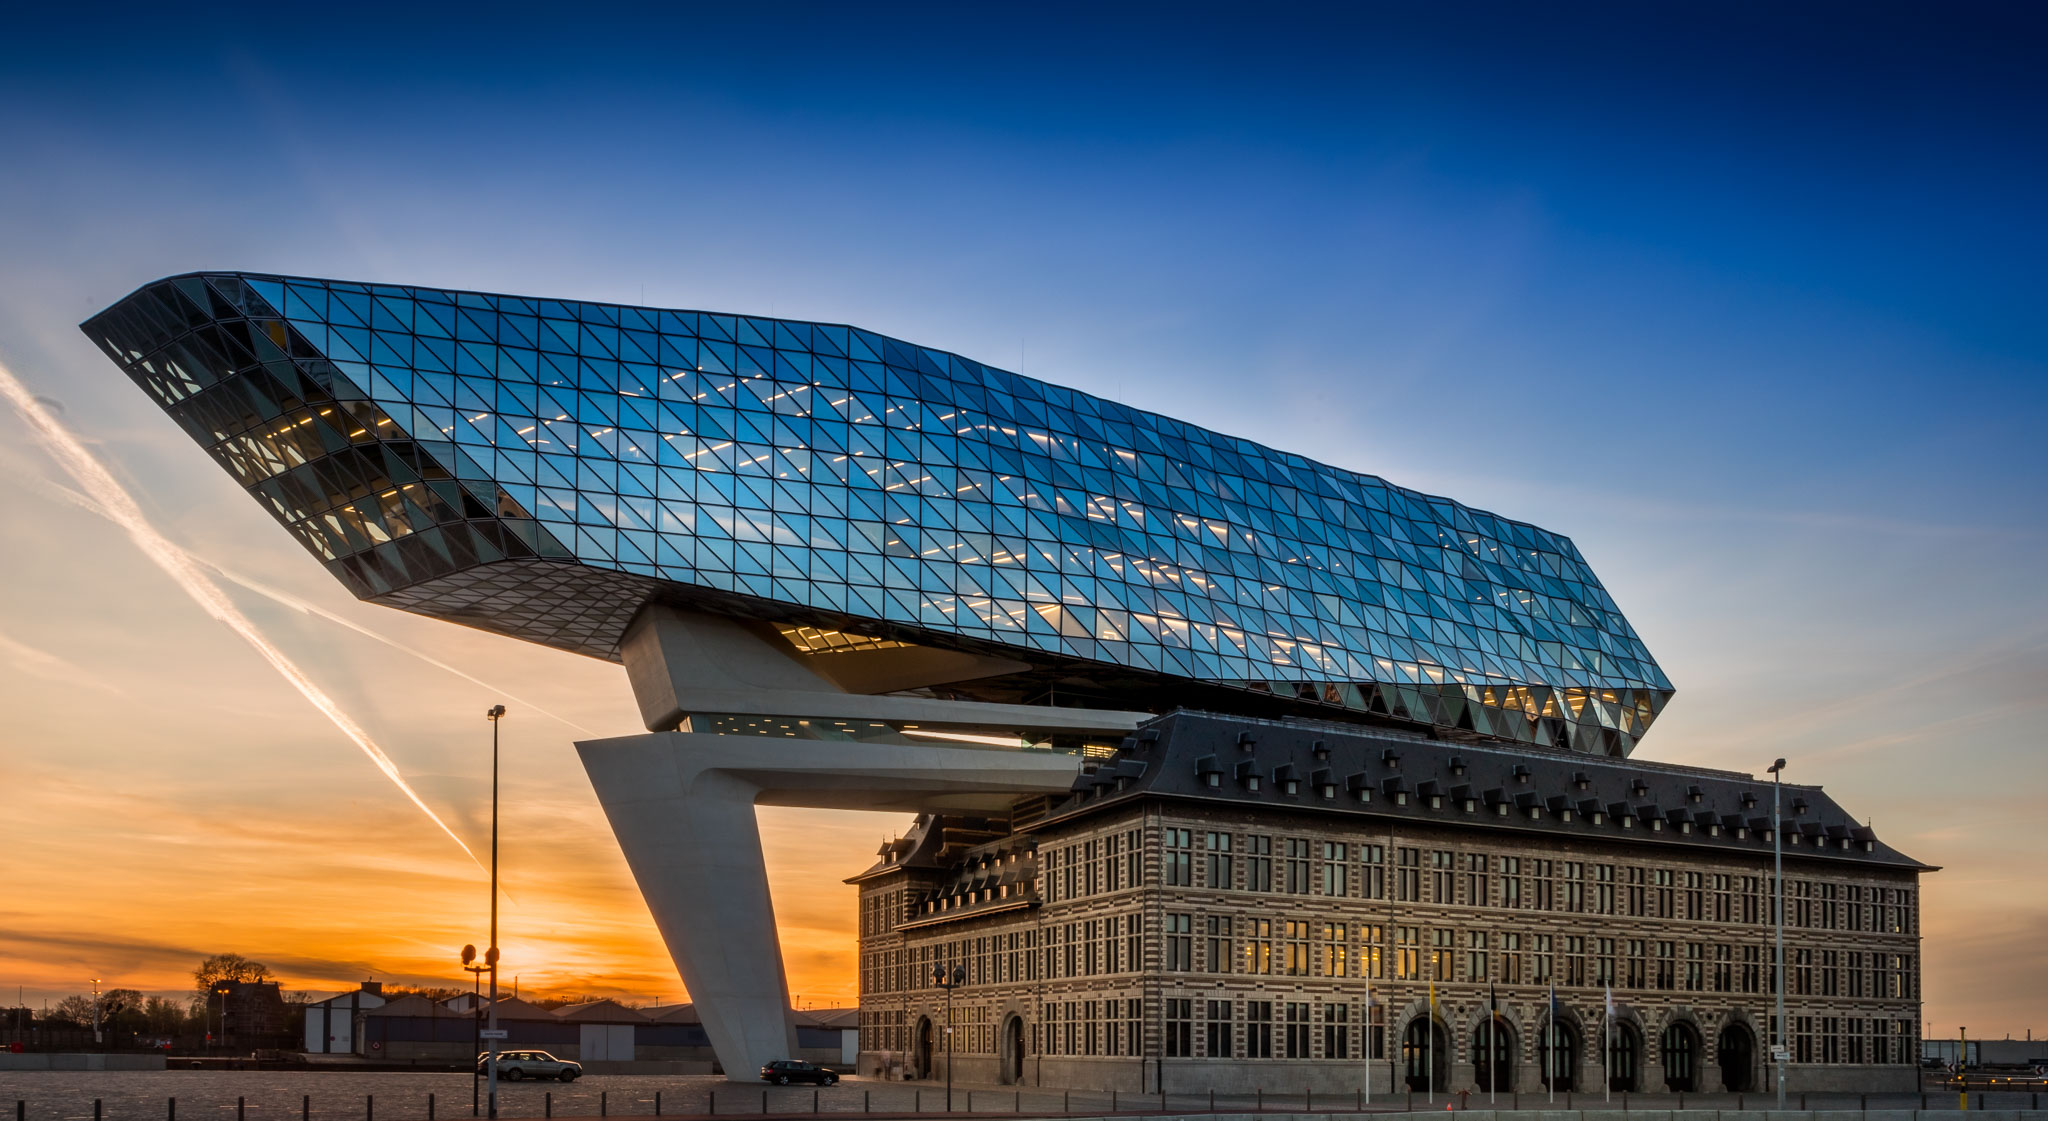 Port House by Architect Zaha Hadid for the Antwerp Port Authority